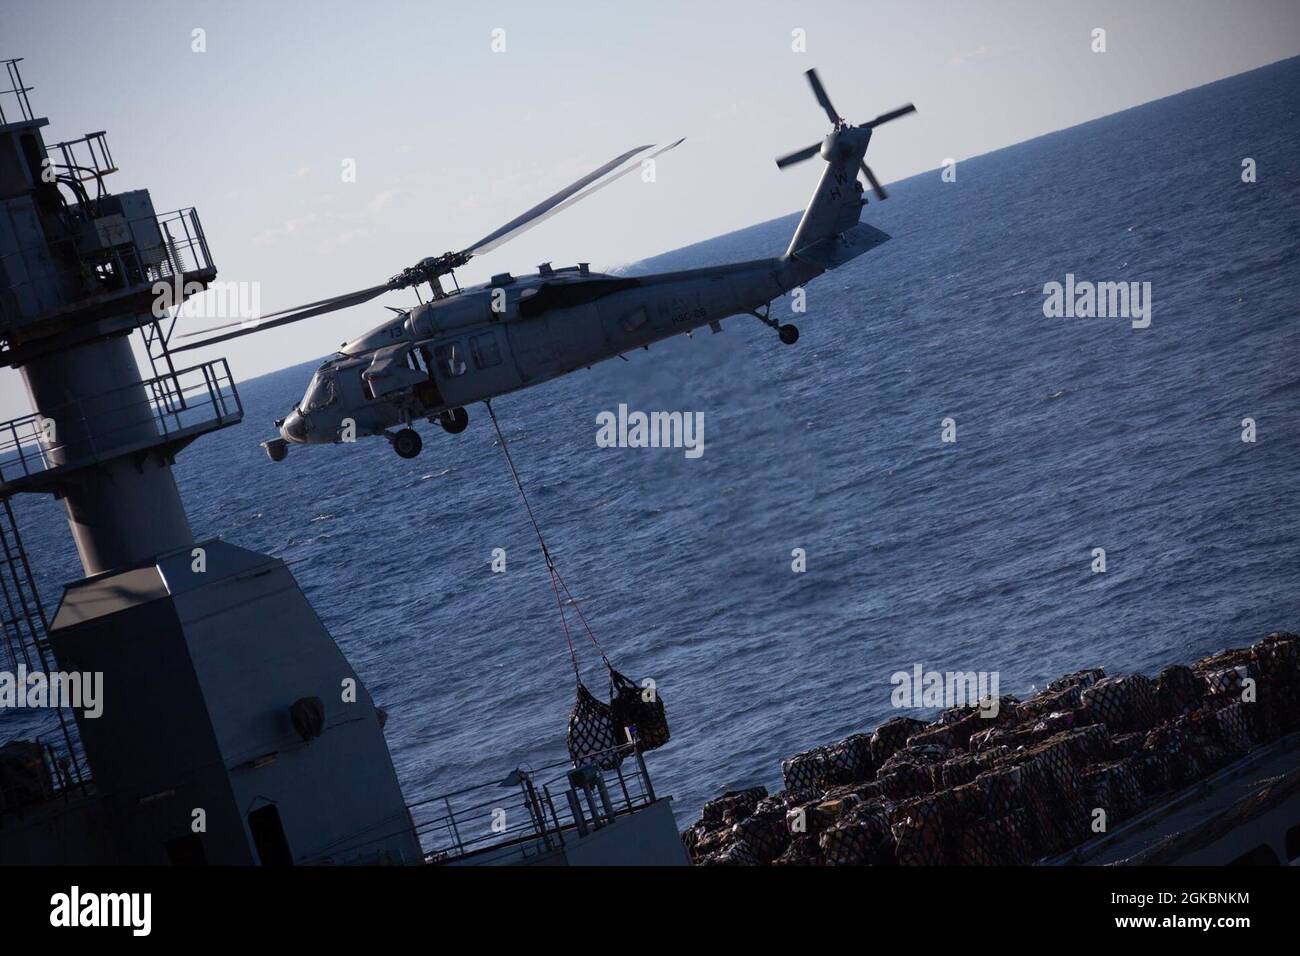 A U.S. Navy MH-60 Sea Hawk lifts cargo in support of a replenishment at sea (RAS) off the Atlantic Coast during Composite Unit Training Exercise (COMPTUEX) on March 5, 2021. COMPTUEX is a month-long training event designed to test the MEU’s capabilities against the full spectrum of military operations. Stock Photo